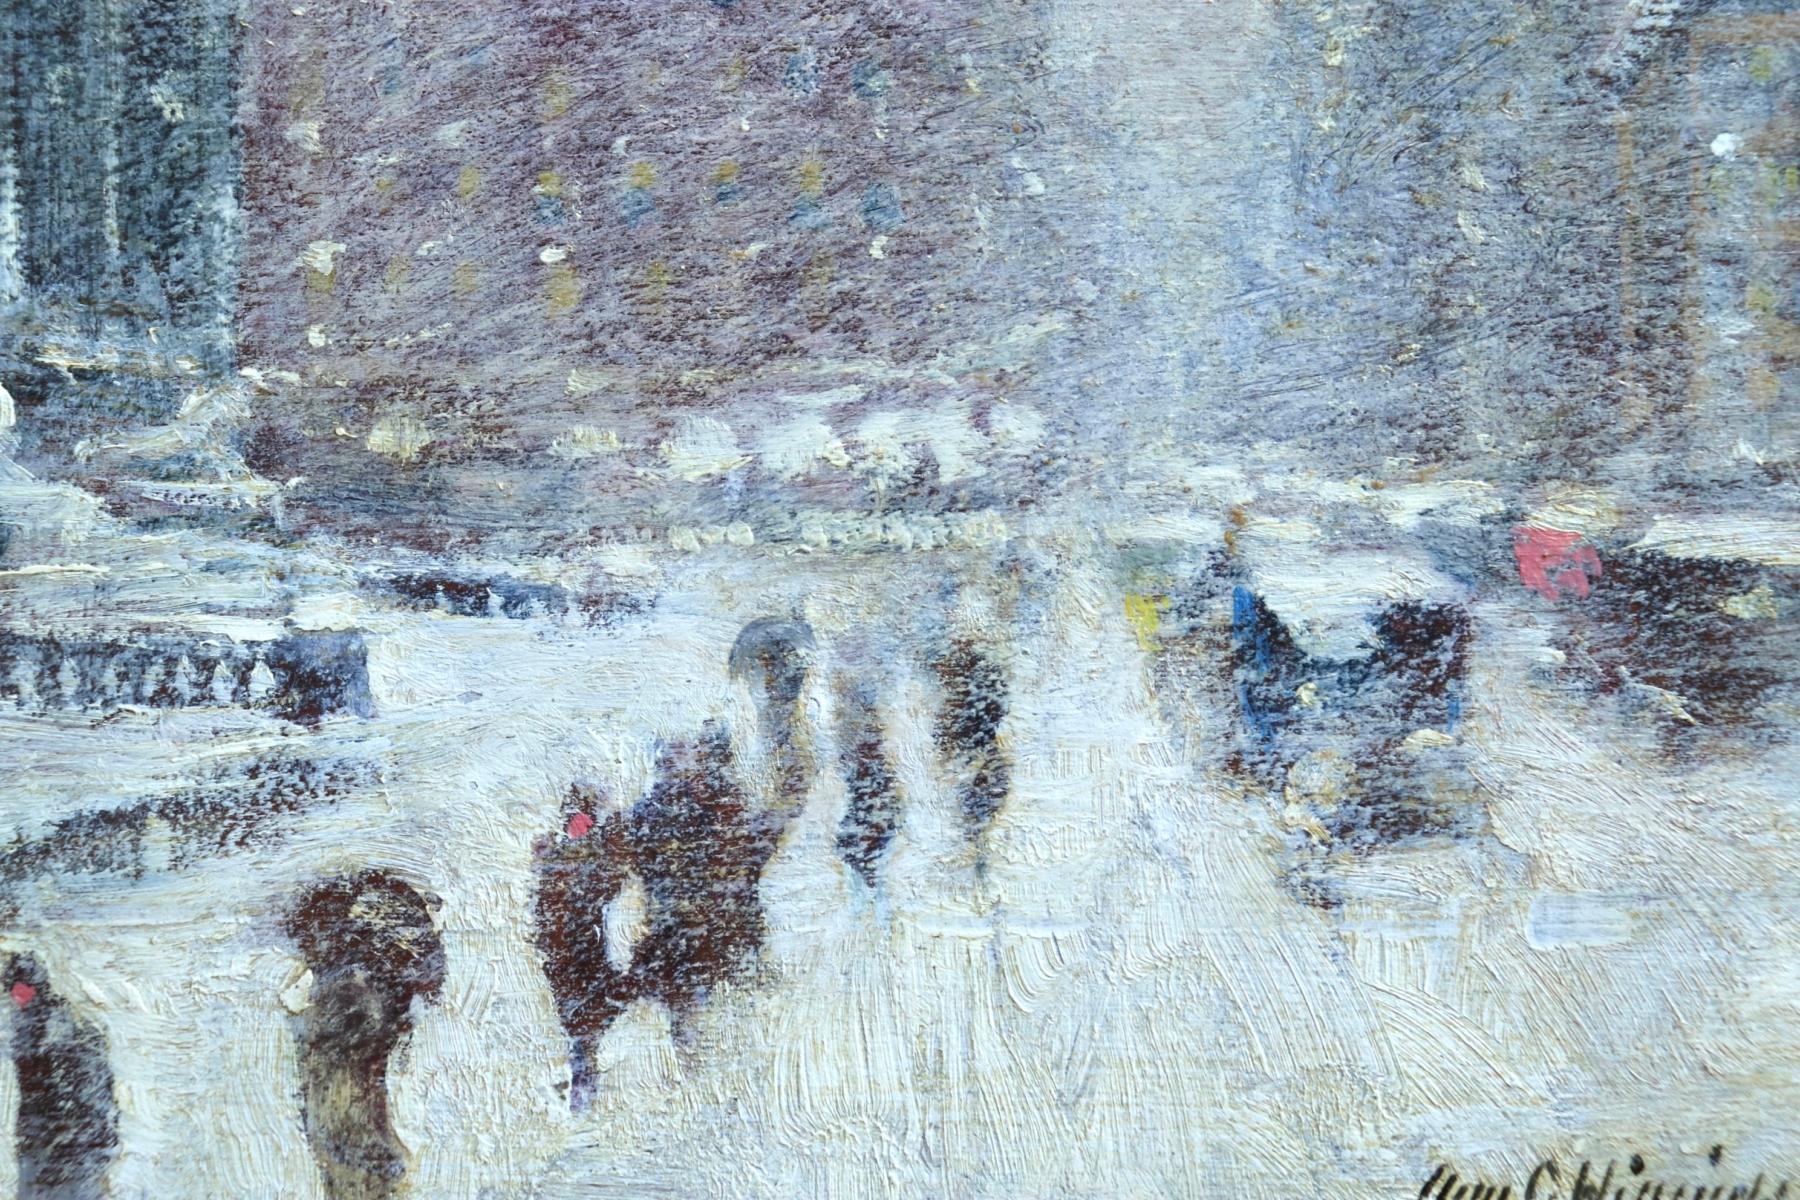 City Storm - New York City Library - Cityscape in Snow Oil by Guy Wiggins - American Impressionist Painting by Guy Carleton Wiggins